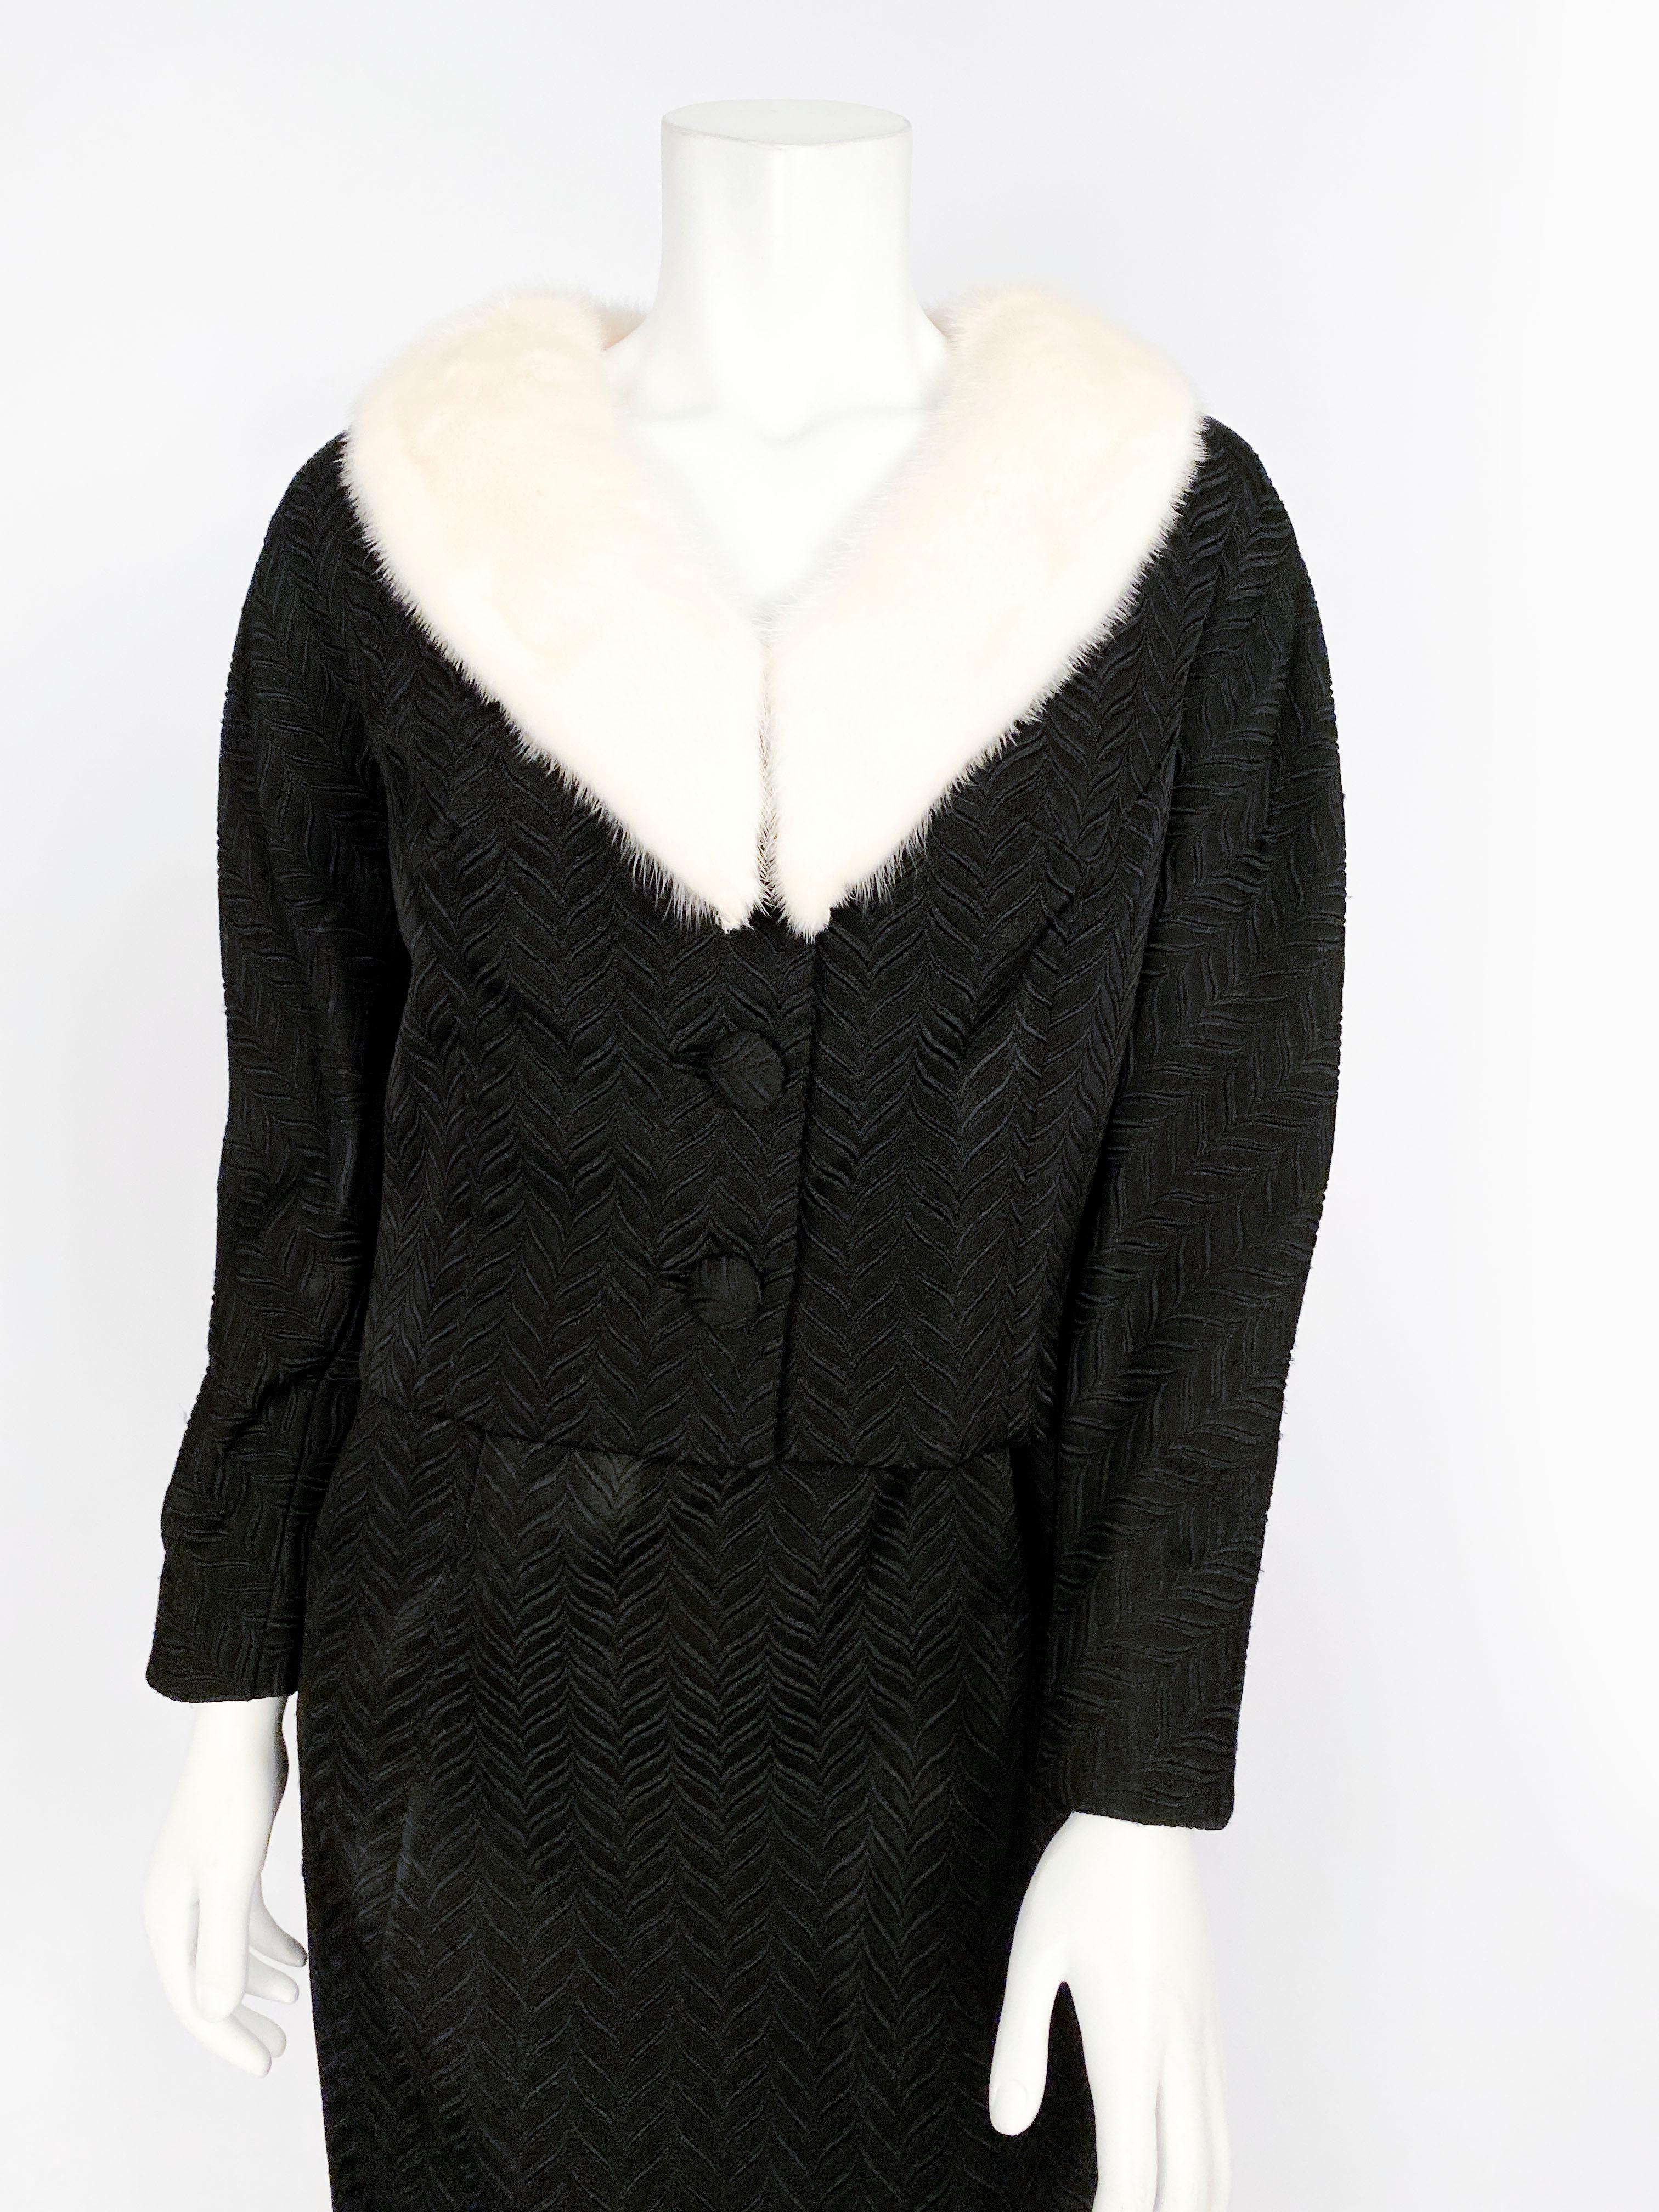 1950s dress with matching jacket made of a black herringbone patterned jacquard in contrast to the jackets' cream mink collar. The jacket is cropped with full length sleeves and a silk lining. 